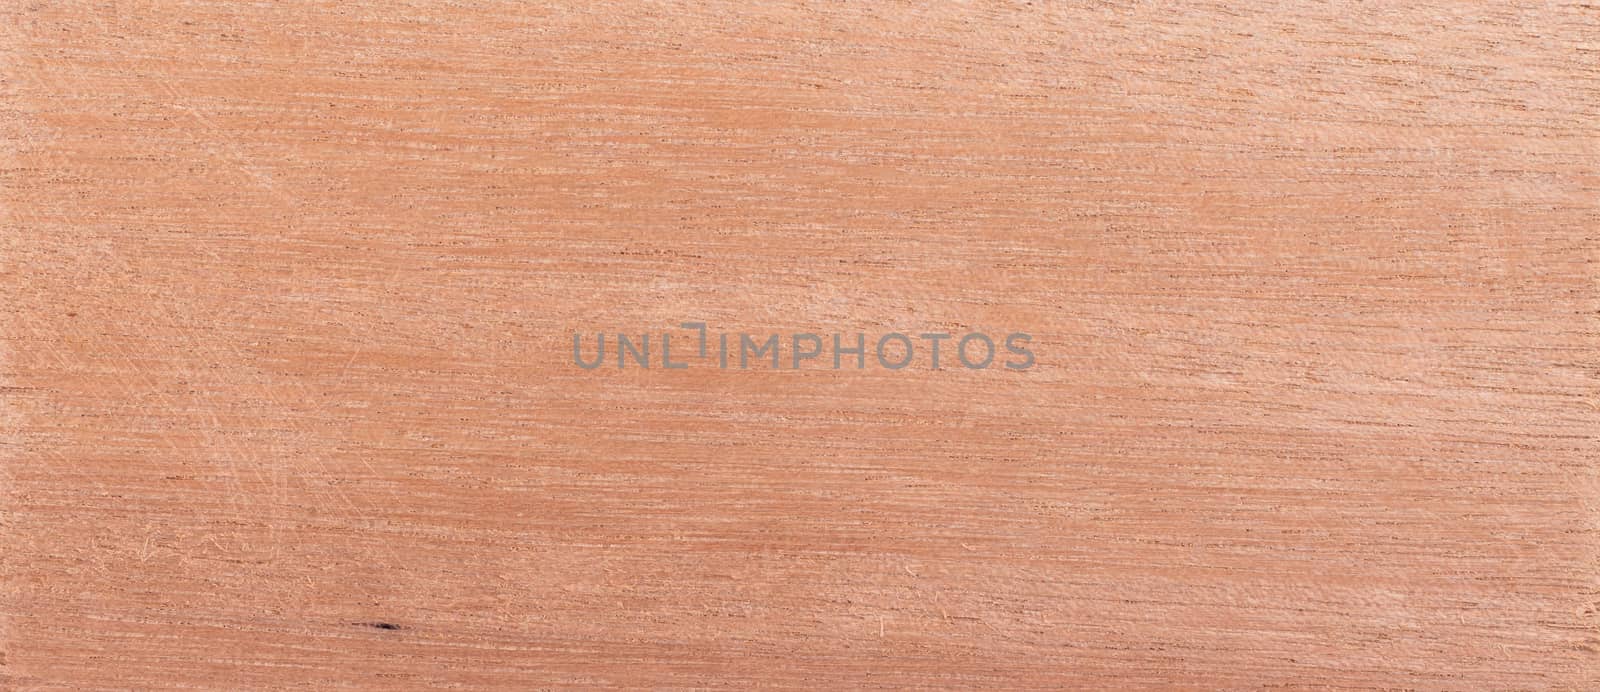 Wood background - Wood from the tropical rainforest - Suriname - Qualea spp